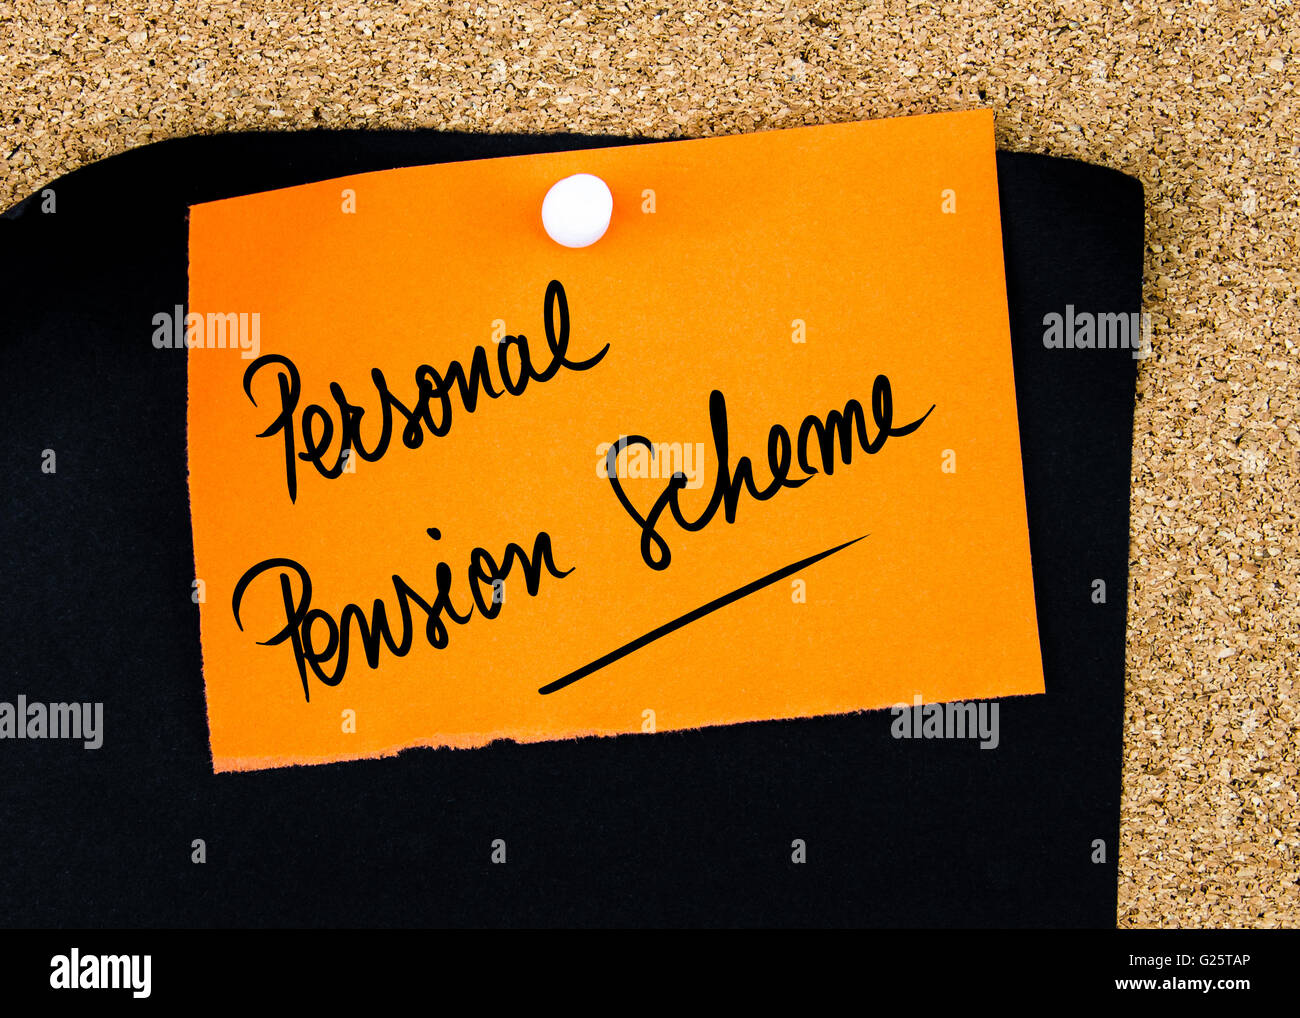 Personal Pension Scheme written on orange paper note pinned on cork board with white thumbtacks, copy space available Stock Photo